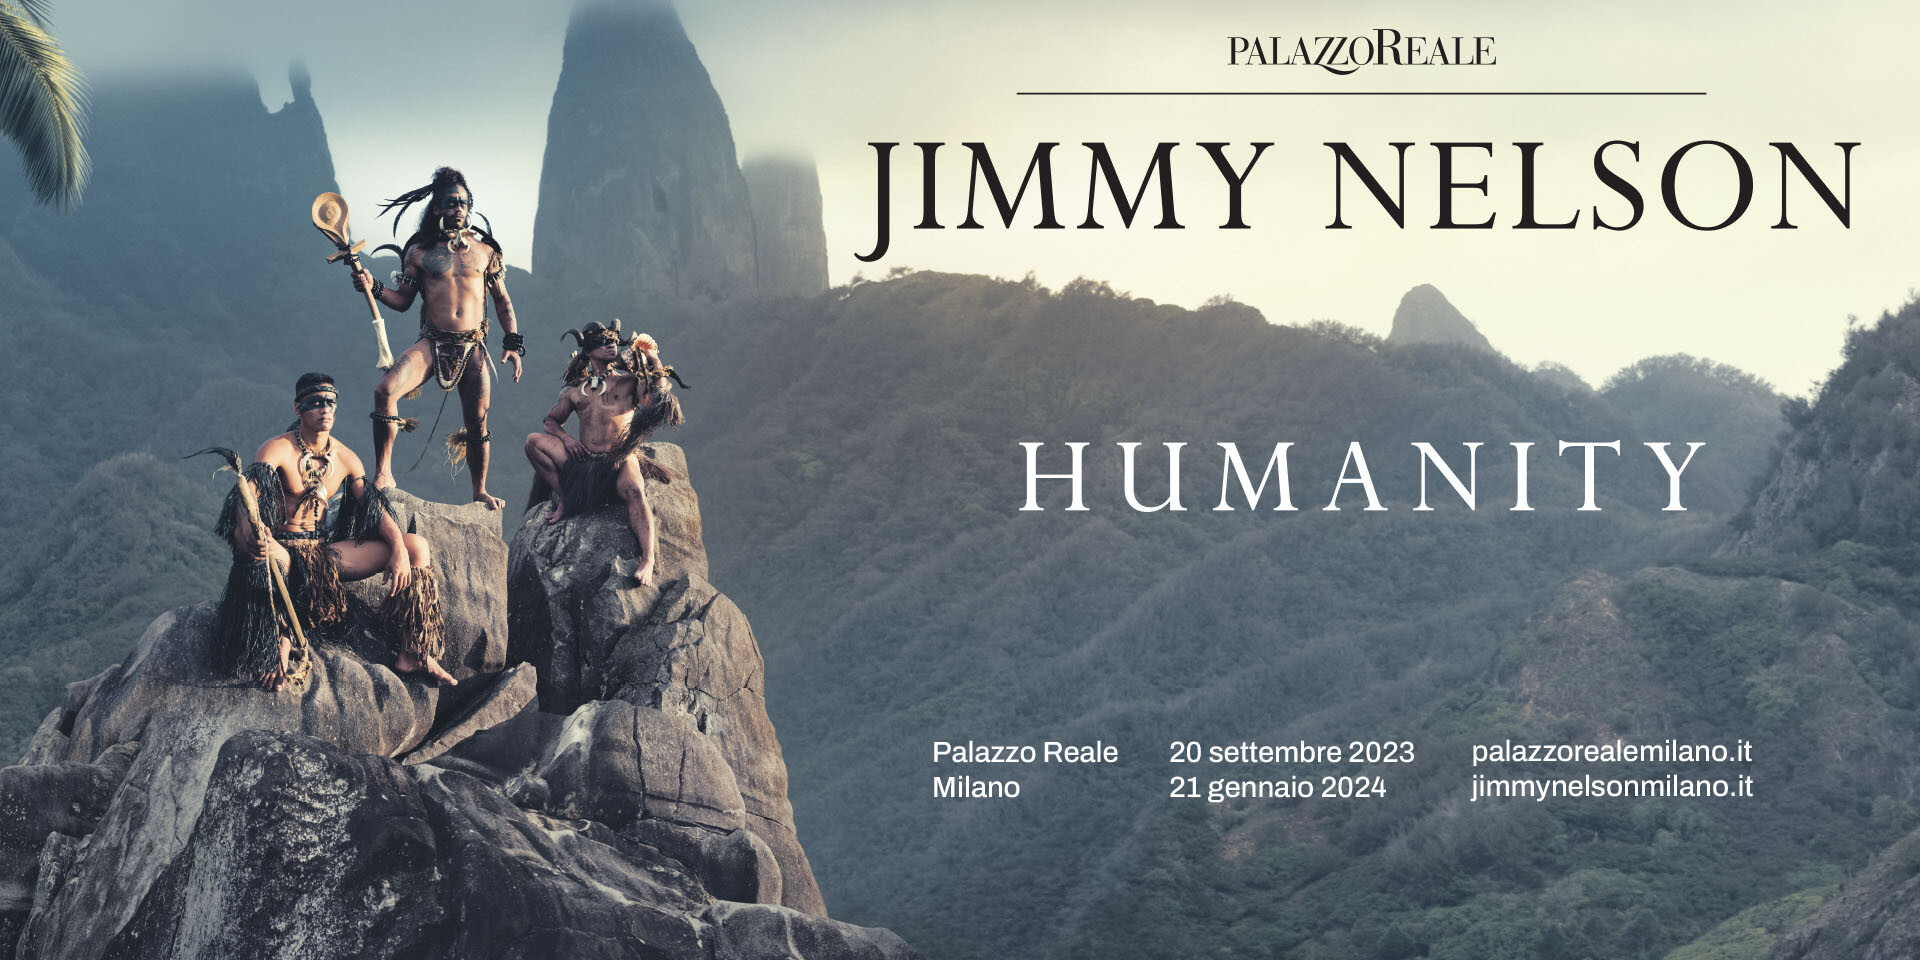 Jimmy Nelson. Humanity, mostra a Palazzo Reale di Milano